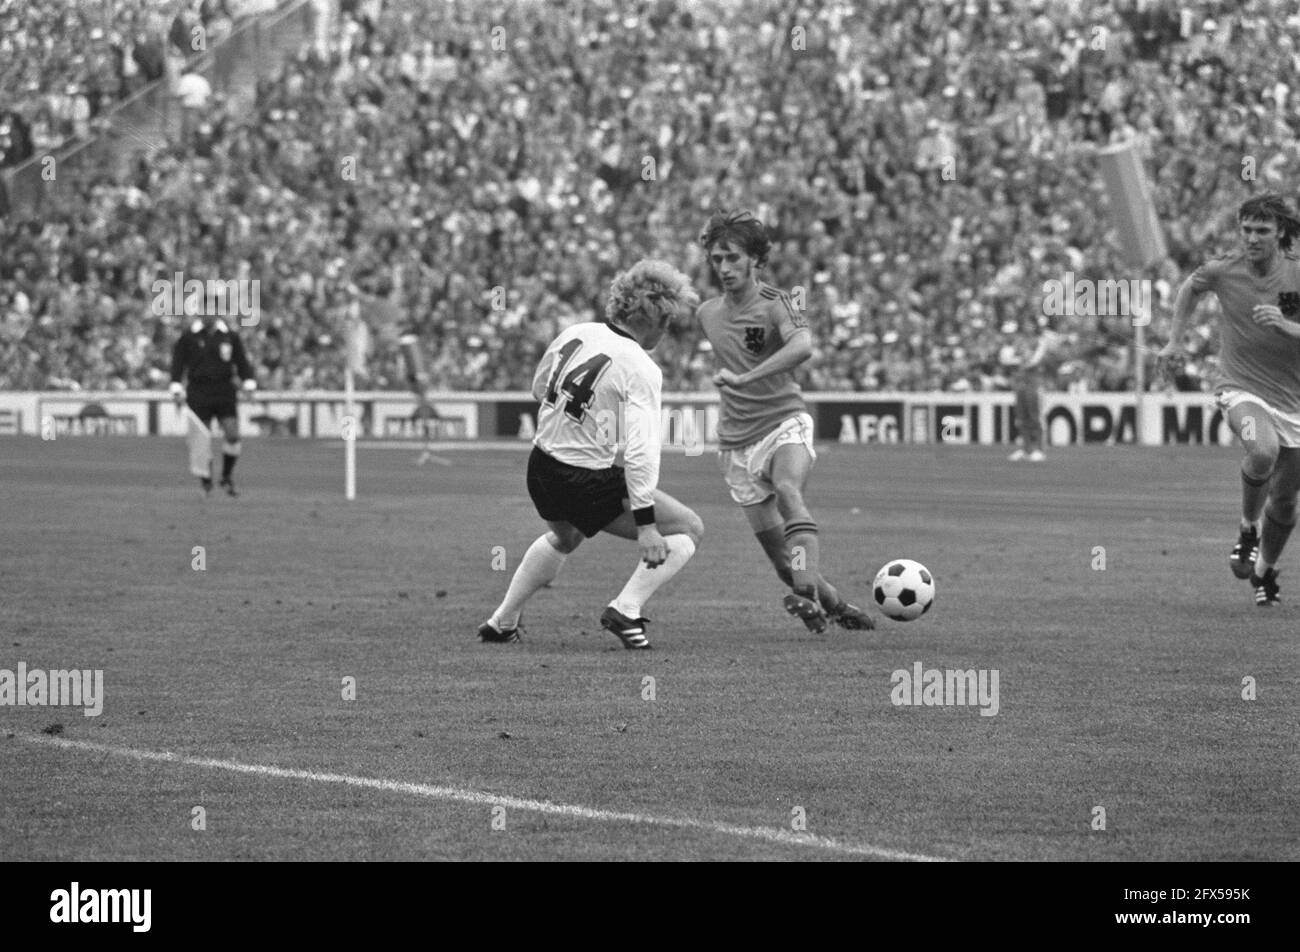 World Cup final 1974 in Munich, West Germany v Netherlands 2-1; game moments, July 7, 1974, finals, sports, soccer, world championships, The Netherlands, 20th century press agency photo, news to remember, documentary, historic photography 1945-1990, visual stories, human history of the Twentieth Century, capturing moments in time Stock Photo